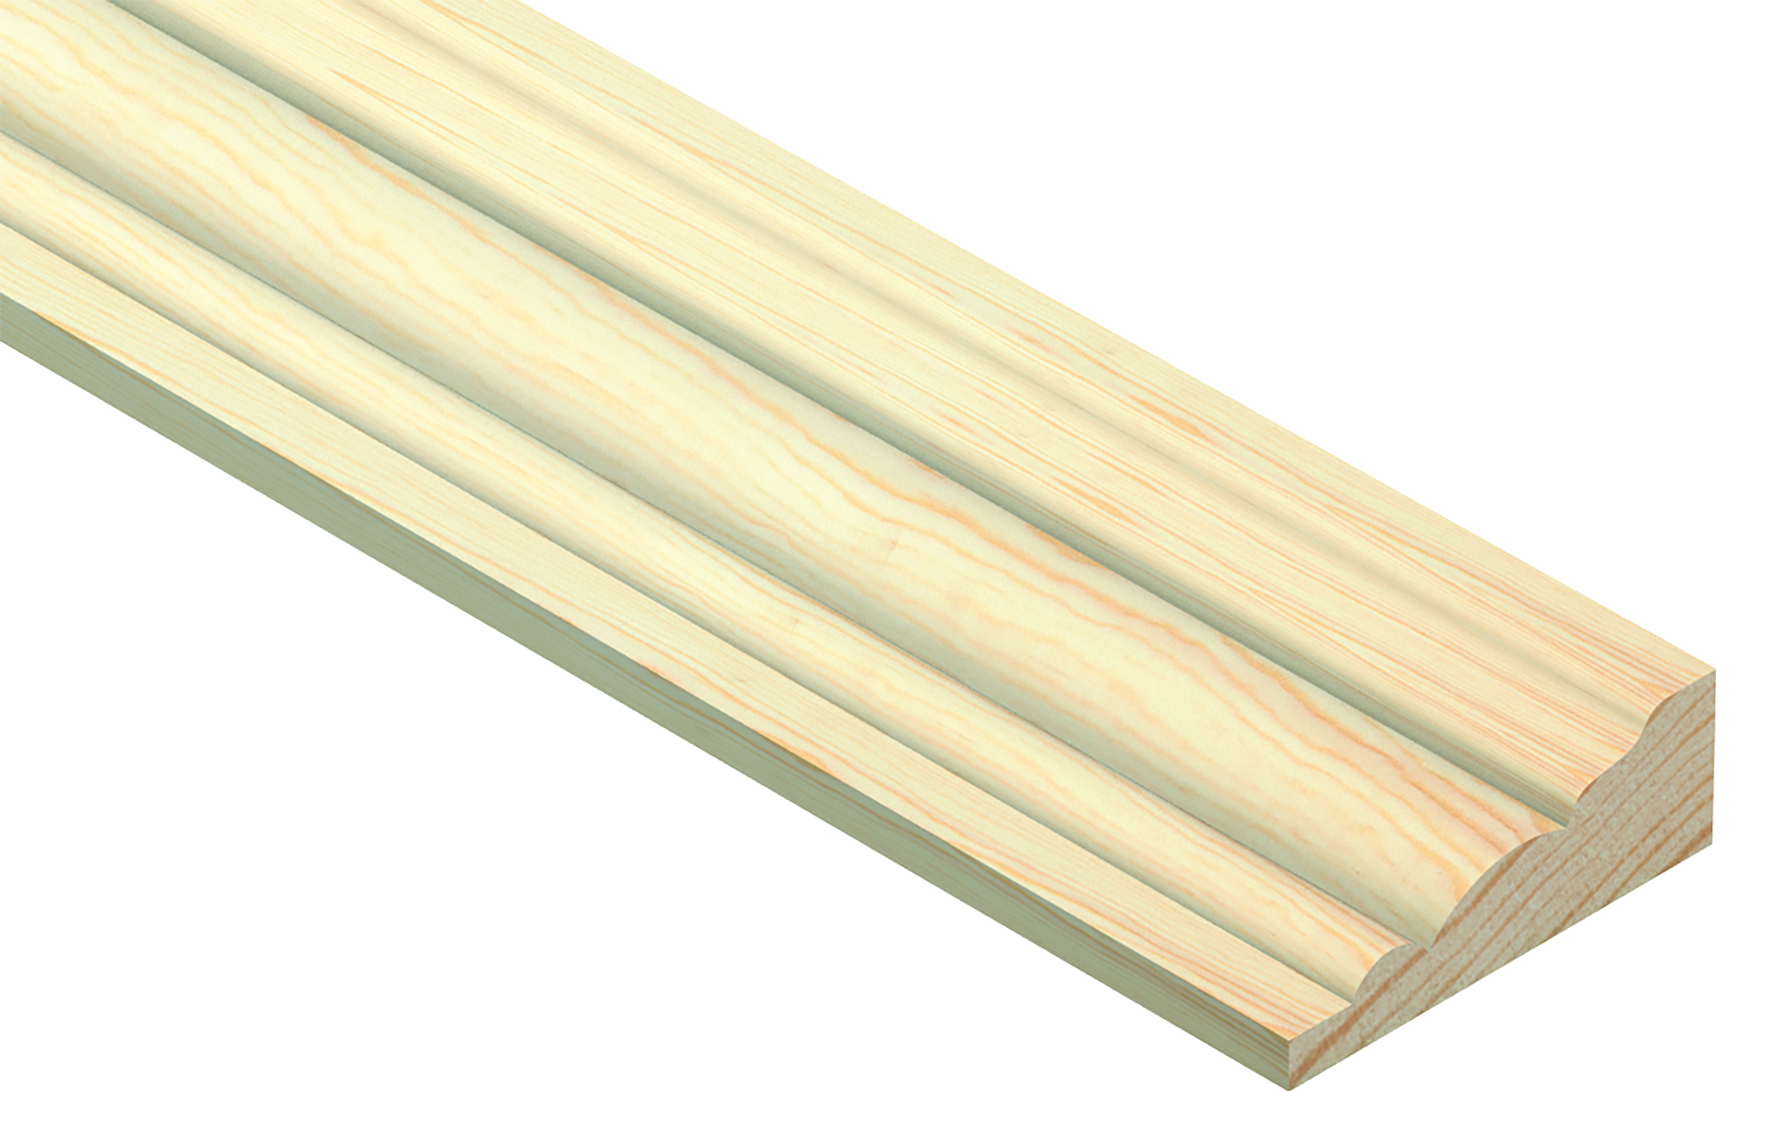 Image of Cheshire Mouldings Pine Barrel - 34 x 12 x 2400mm